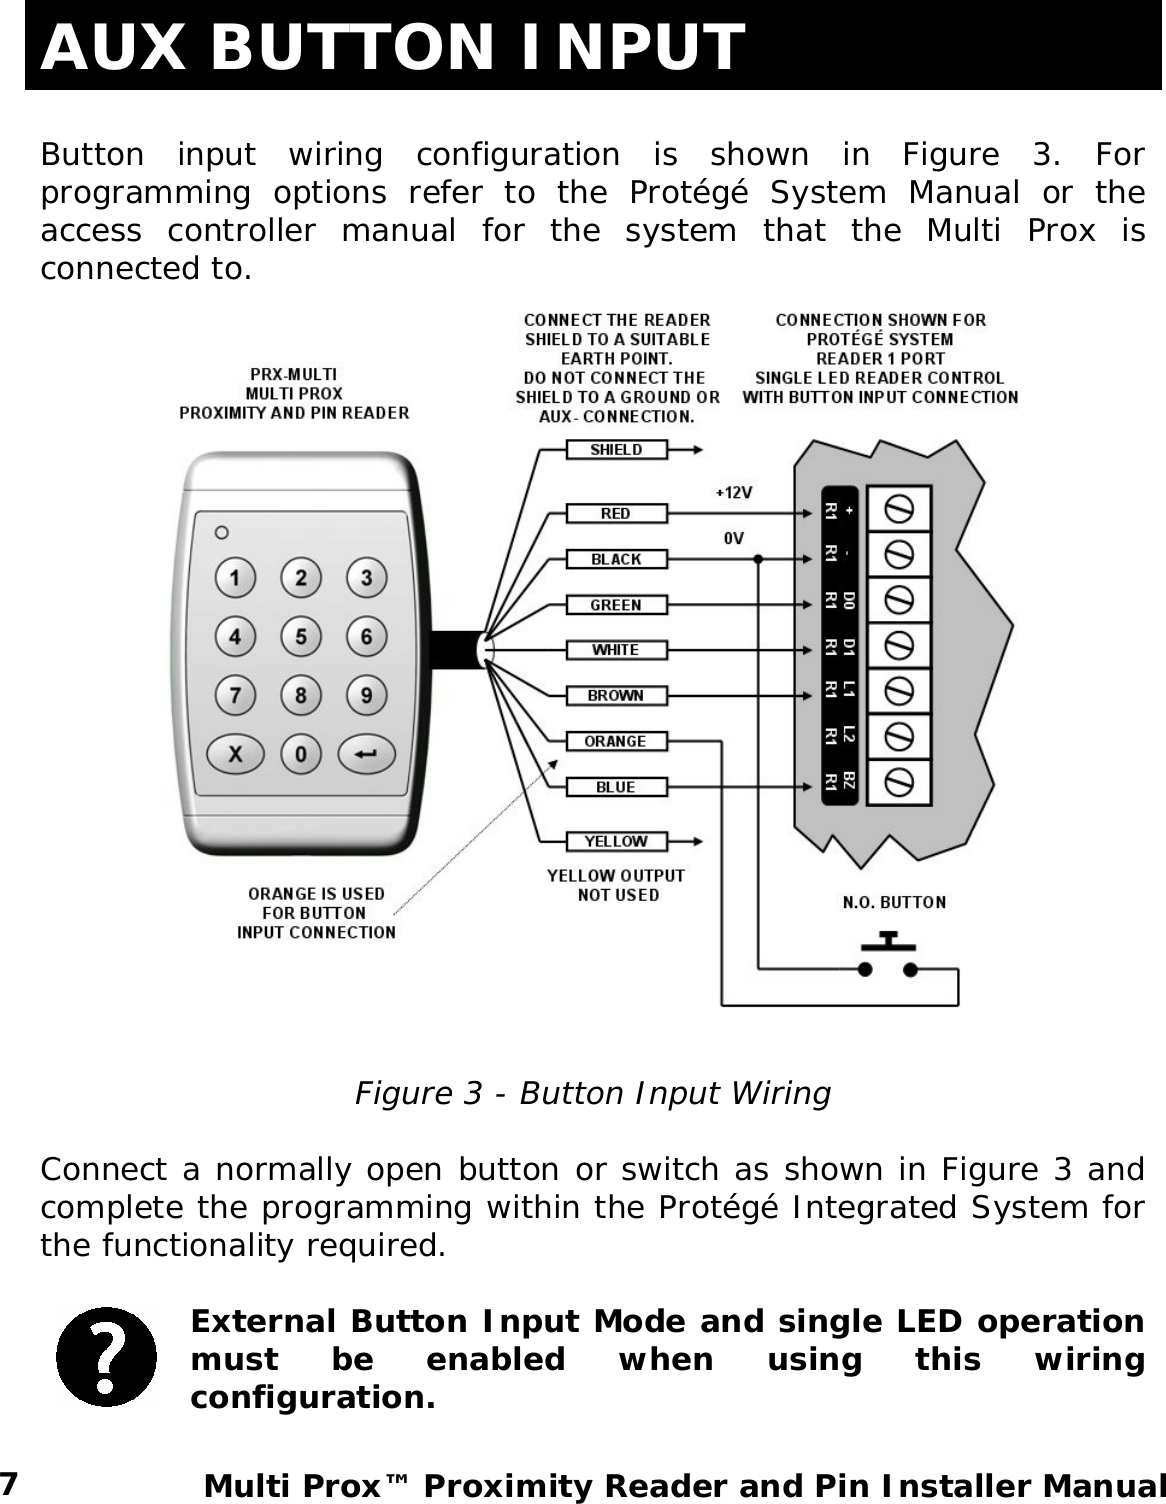 AUX BUTTON INPUT  Button input wiring configuration is shown in Figure 3. For programming options refer to the Protégé System Manual or the access controller manual for the system that the Multi Prox is connected to.    Figure 3 - Button Input Wiring  Connect a normally open button or switch as shown in Figure 3 and complete the programming within the Protégé Integrated System for the functionality required.   External Button Input Mode and single LED operation must be enabled when using this wiring configuration.    7  Multi Prox™ Proximity Reader and Pin Installer Manual  